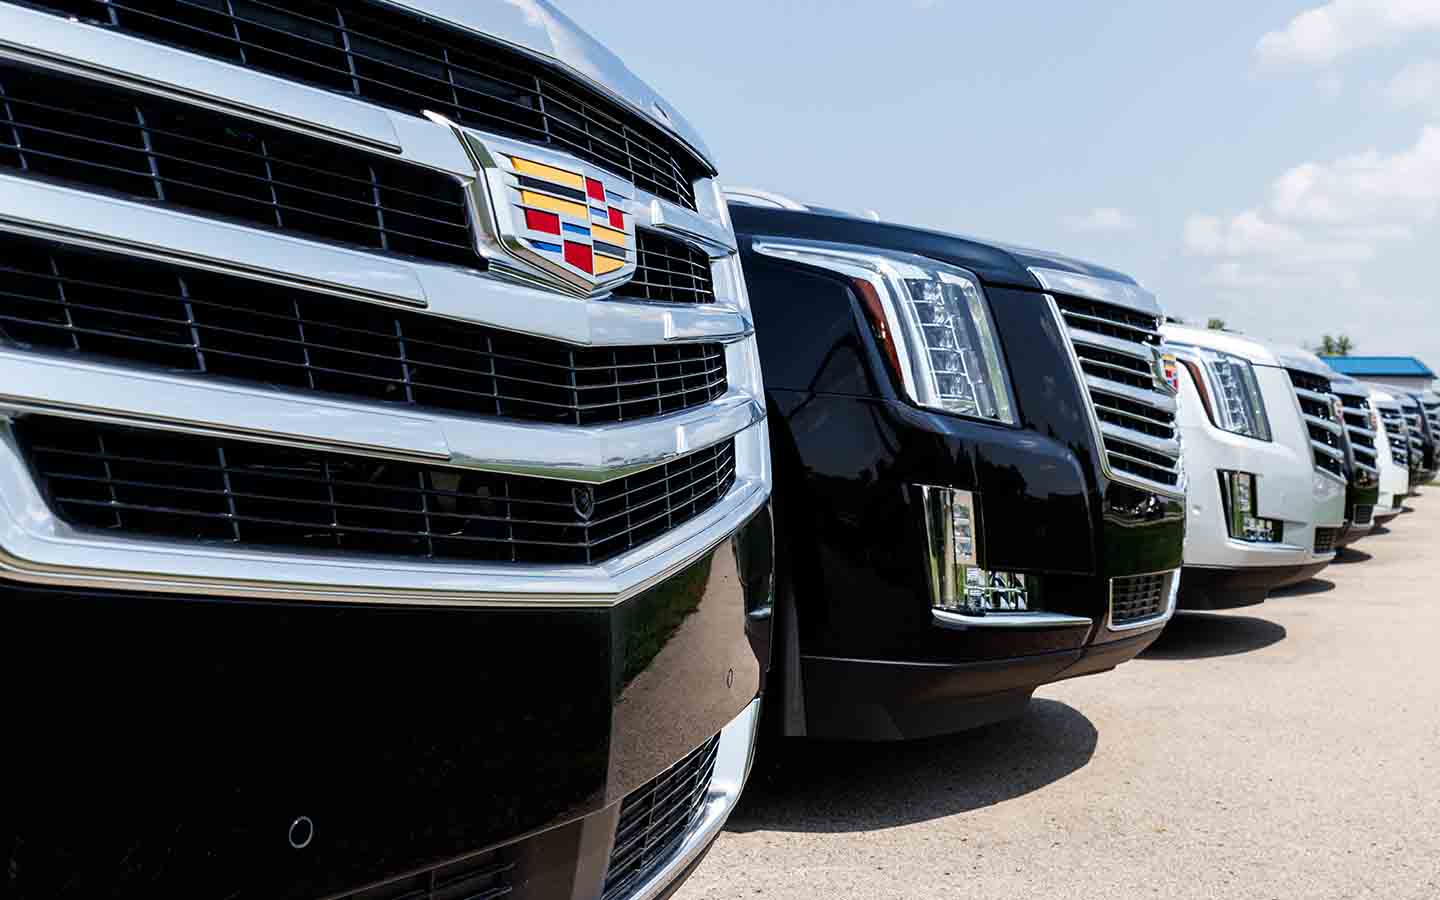 opt for any of the Pre-owned cadillac used cars in the UAE and bring a luxury vehicle home